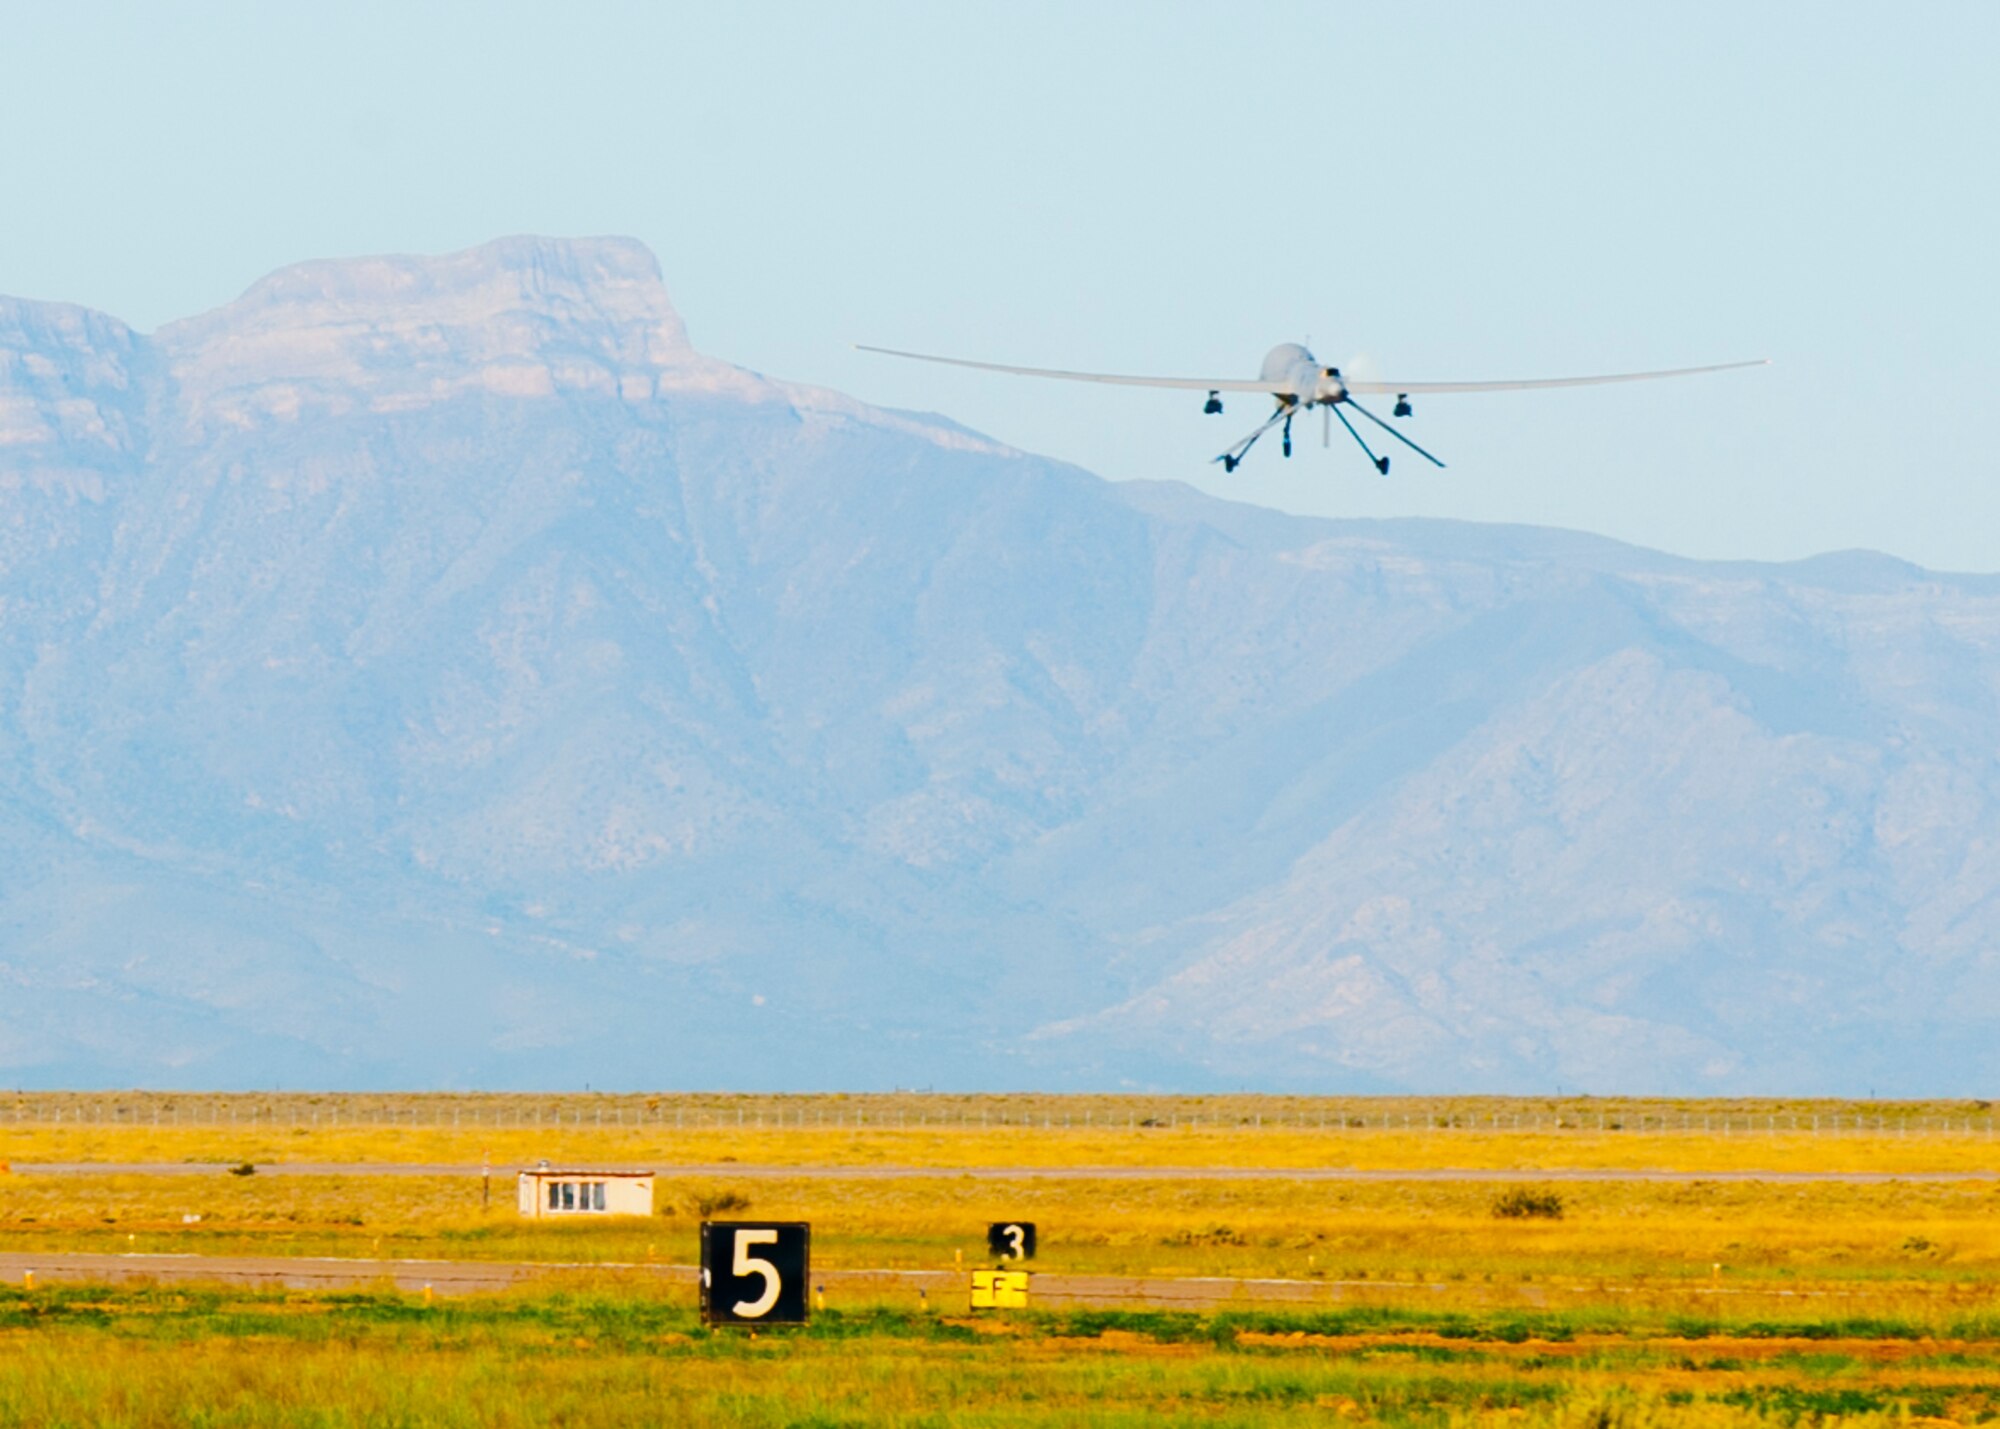 An MQ-1 Predator takes off the runway at Holloman Air Force Base, N.M., Sept. 25. The Predator’s primary functions are to fulfill reconnaissance and forward observation roles.  In addition to the pilot and sensor operator who control the aircraft from a ground control station, flying an MQ-1 requires a culmination of efforts from various squadrons. (U.S. Air Force photo by Airman 1st Class Daniel E. Liddicoet/Released)